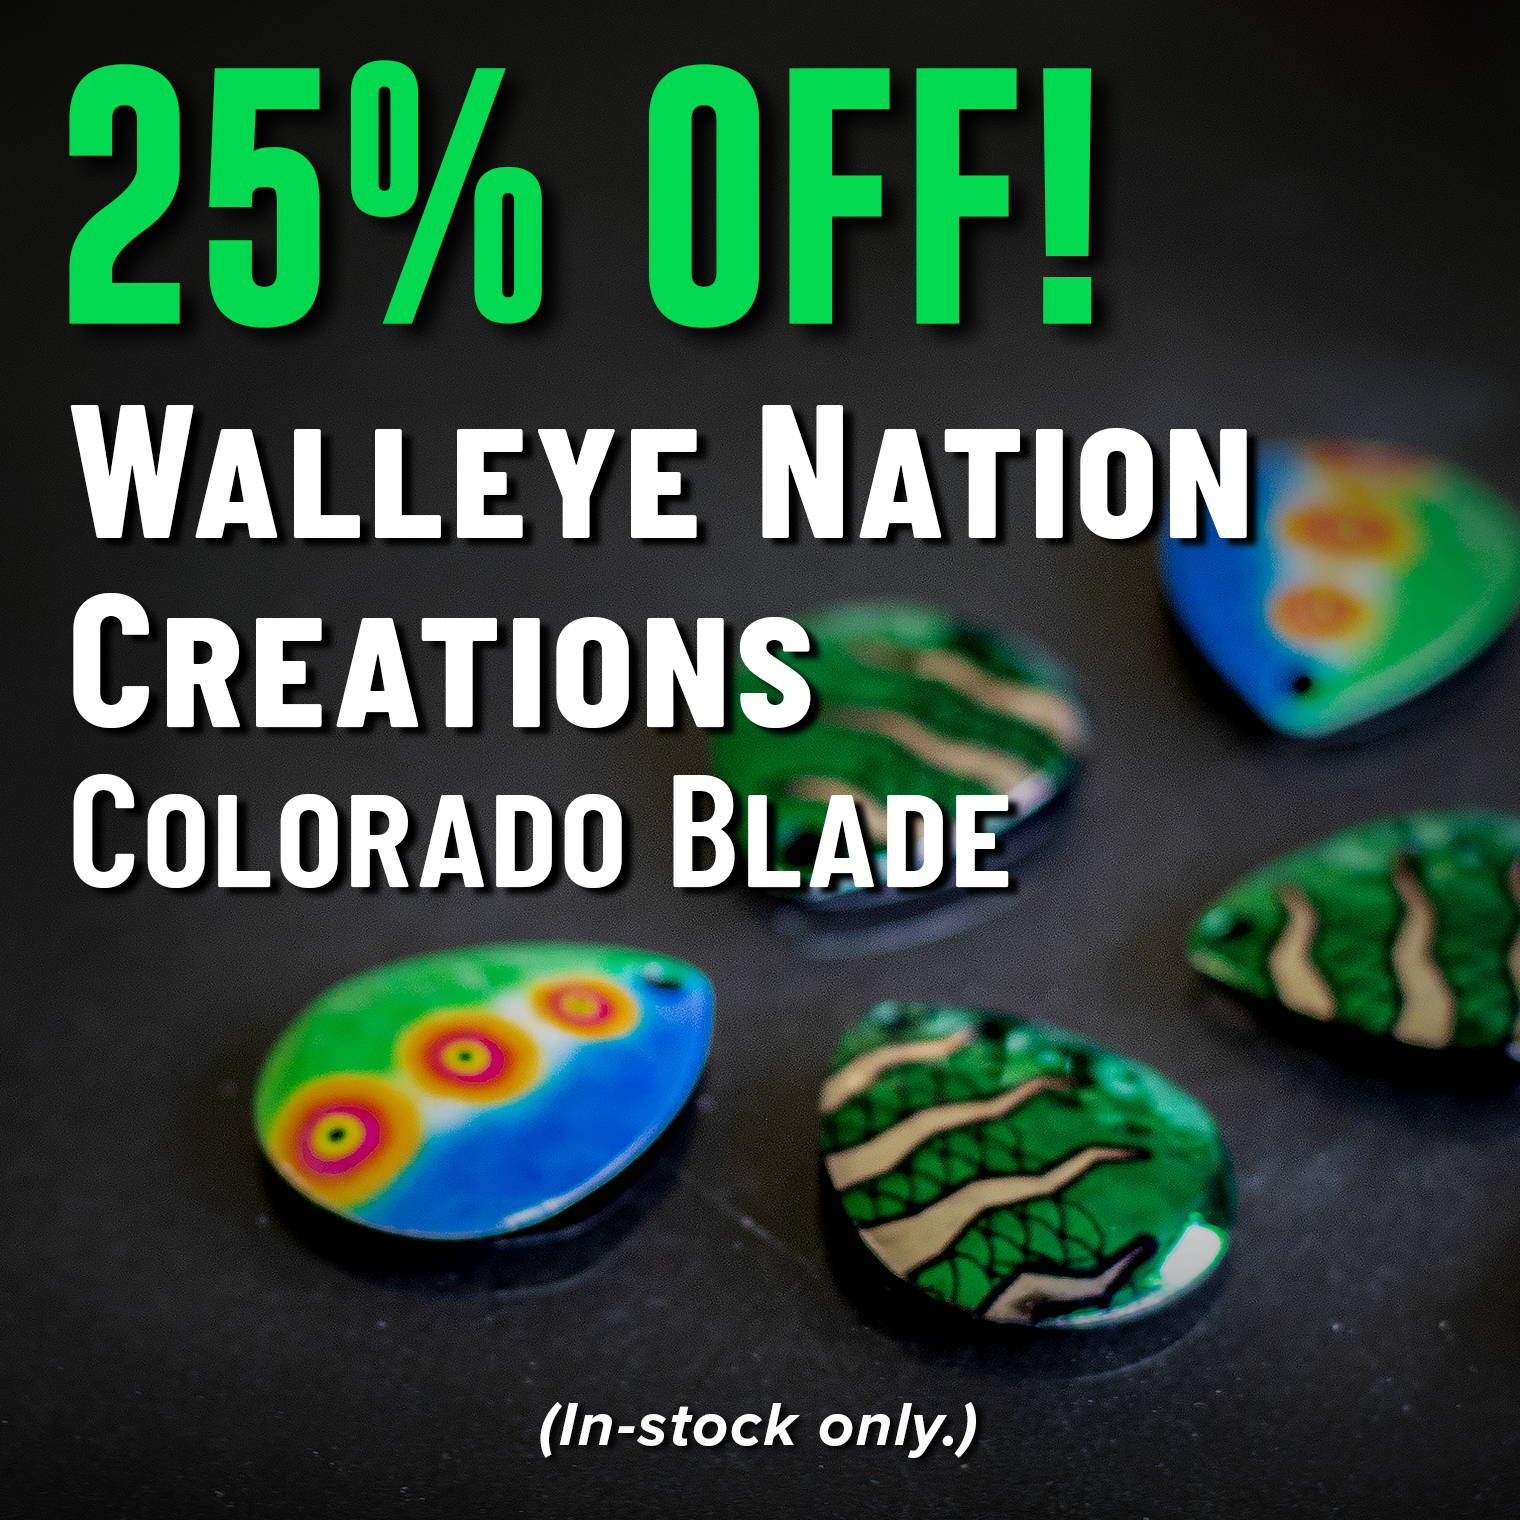 25% Off! Walleye Nation Creations Colorado Blade (In-stock only.)